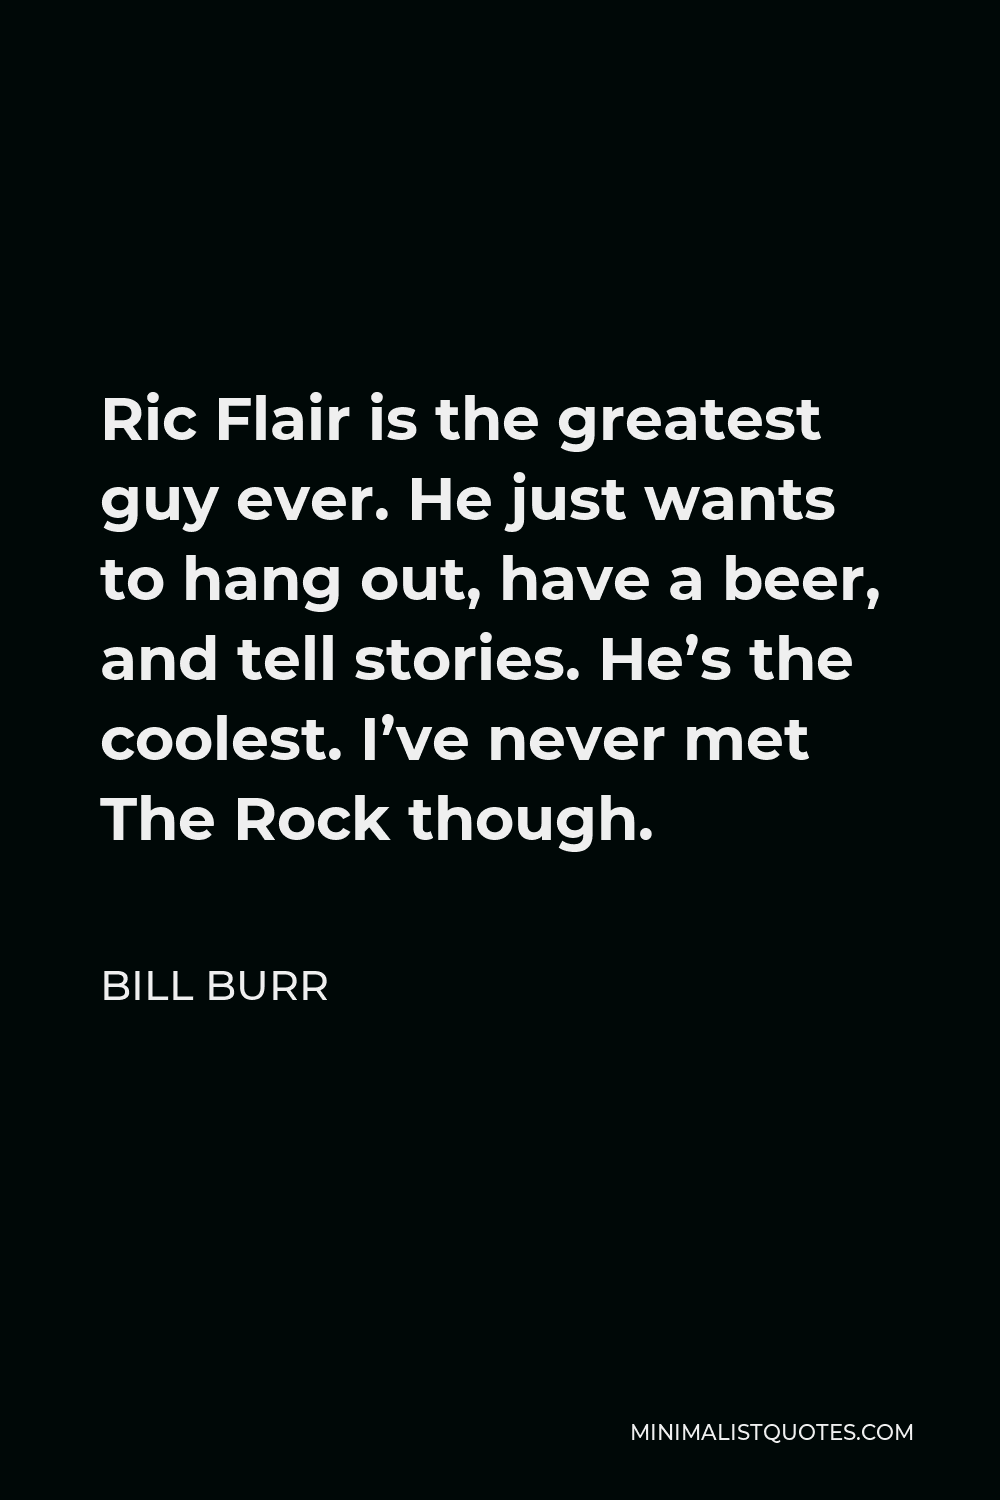 Bill Burr Quote - Ric Flair is the greatest guy ever. He just wants to hang out, have a beer, and tell stories. He’s the coolest. I’ve never met The Rock though.